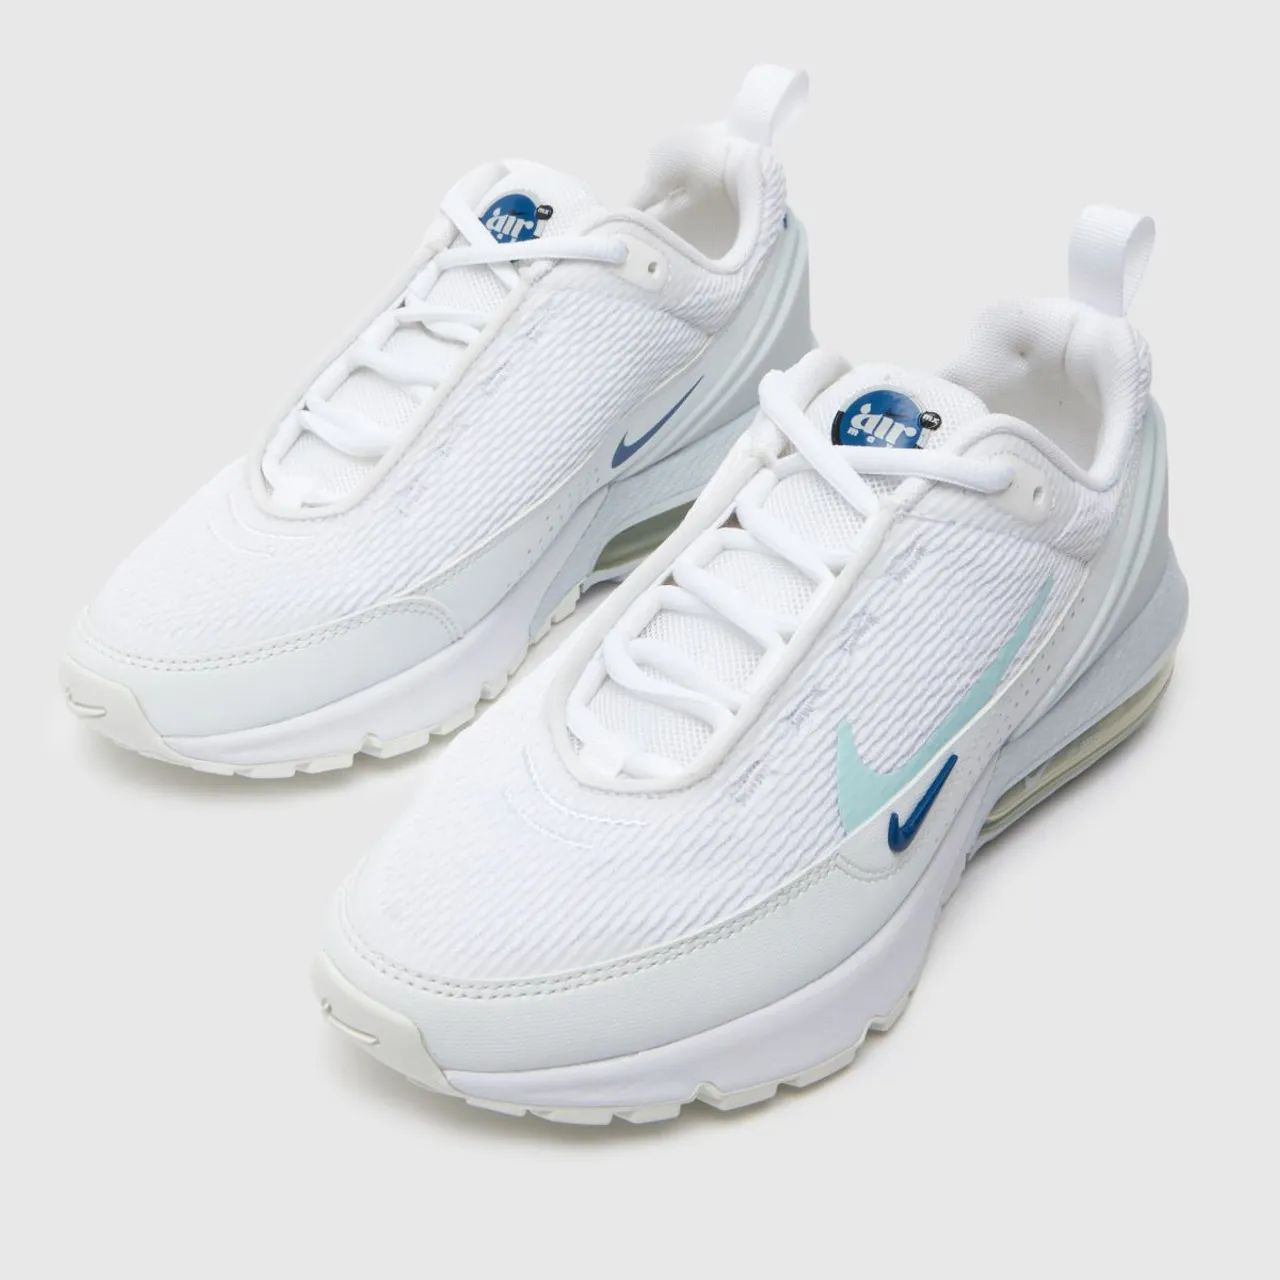 Nike White & pl Blue air max Pulse Boys Youth Trainers